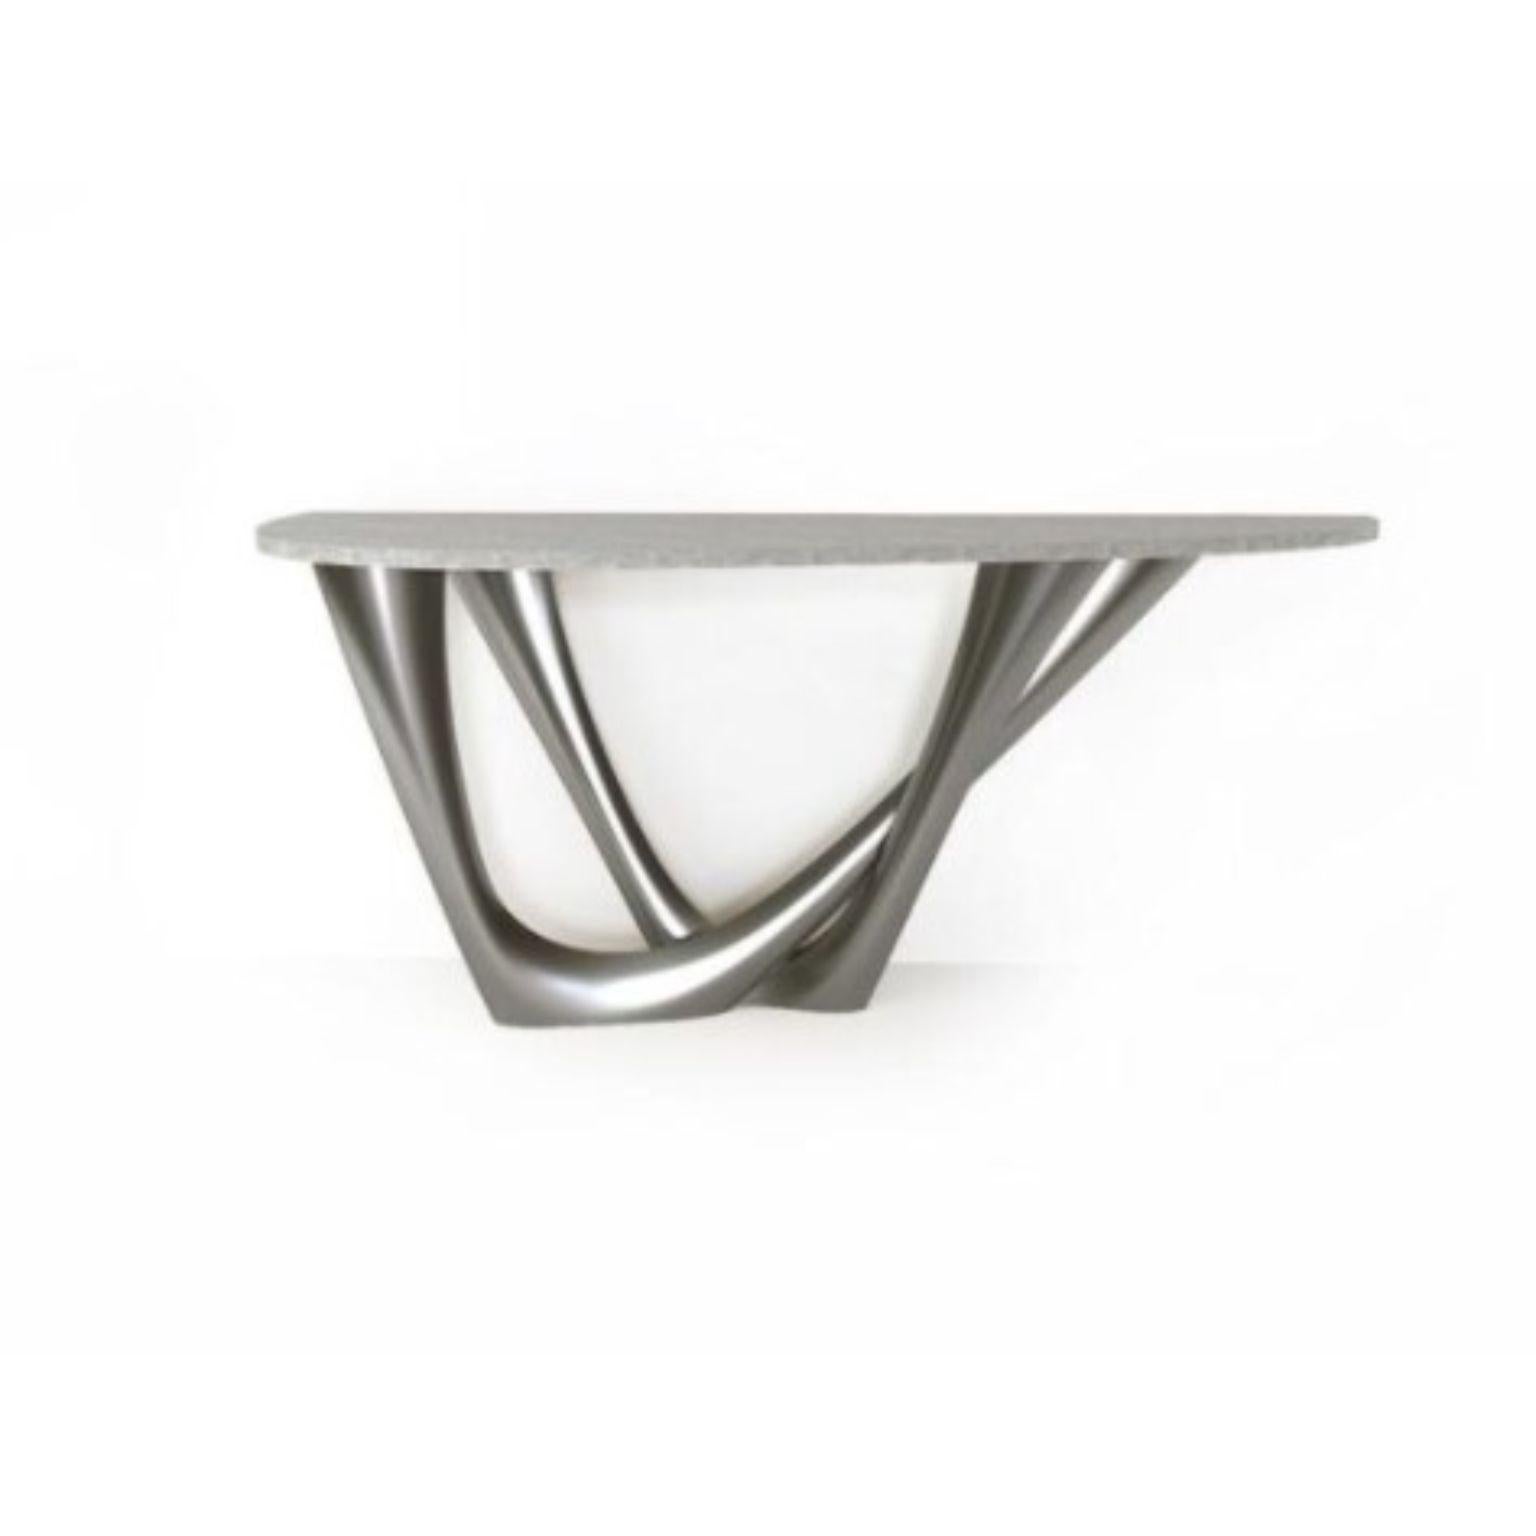 Organic Modern Concrete Grey G-Console Duo Concrete Top and Steel Base by Zieta For Sale